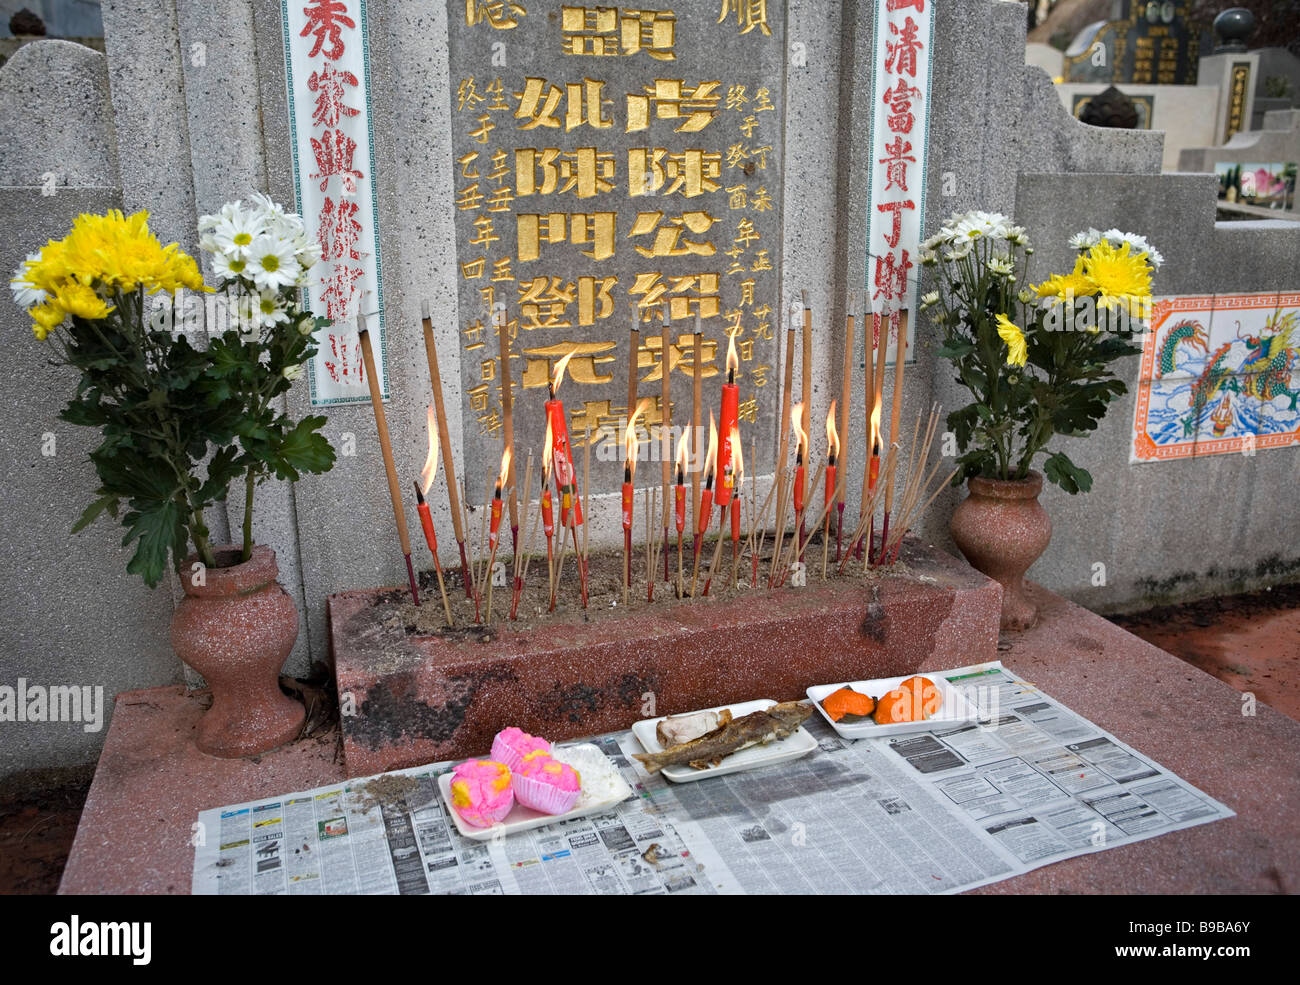 Chinese cemetary in Malaysia during April (Qing Ming festival). Stock Photo